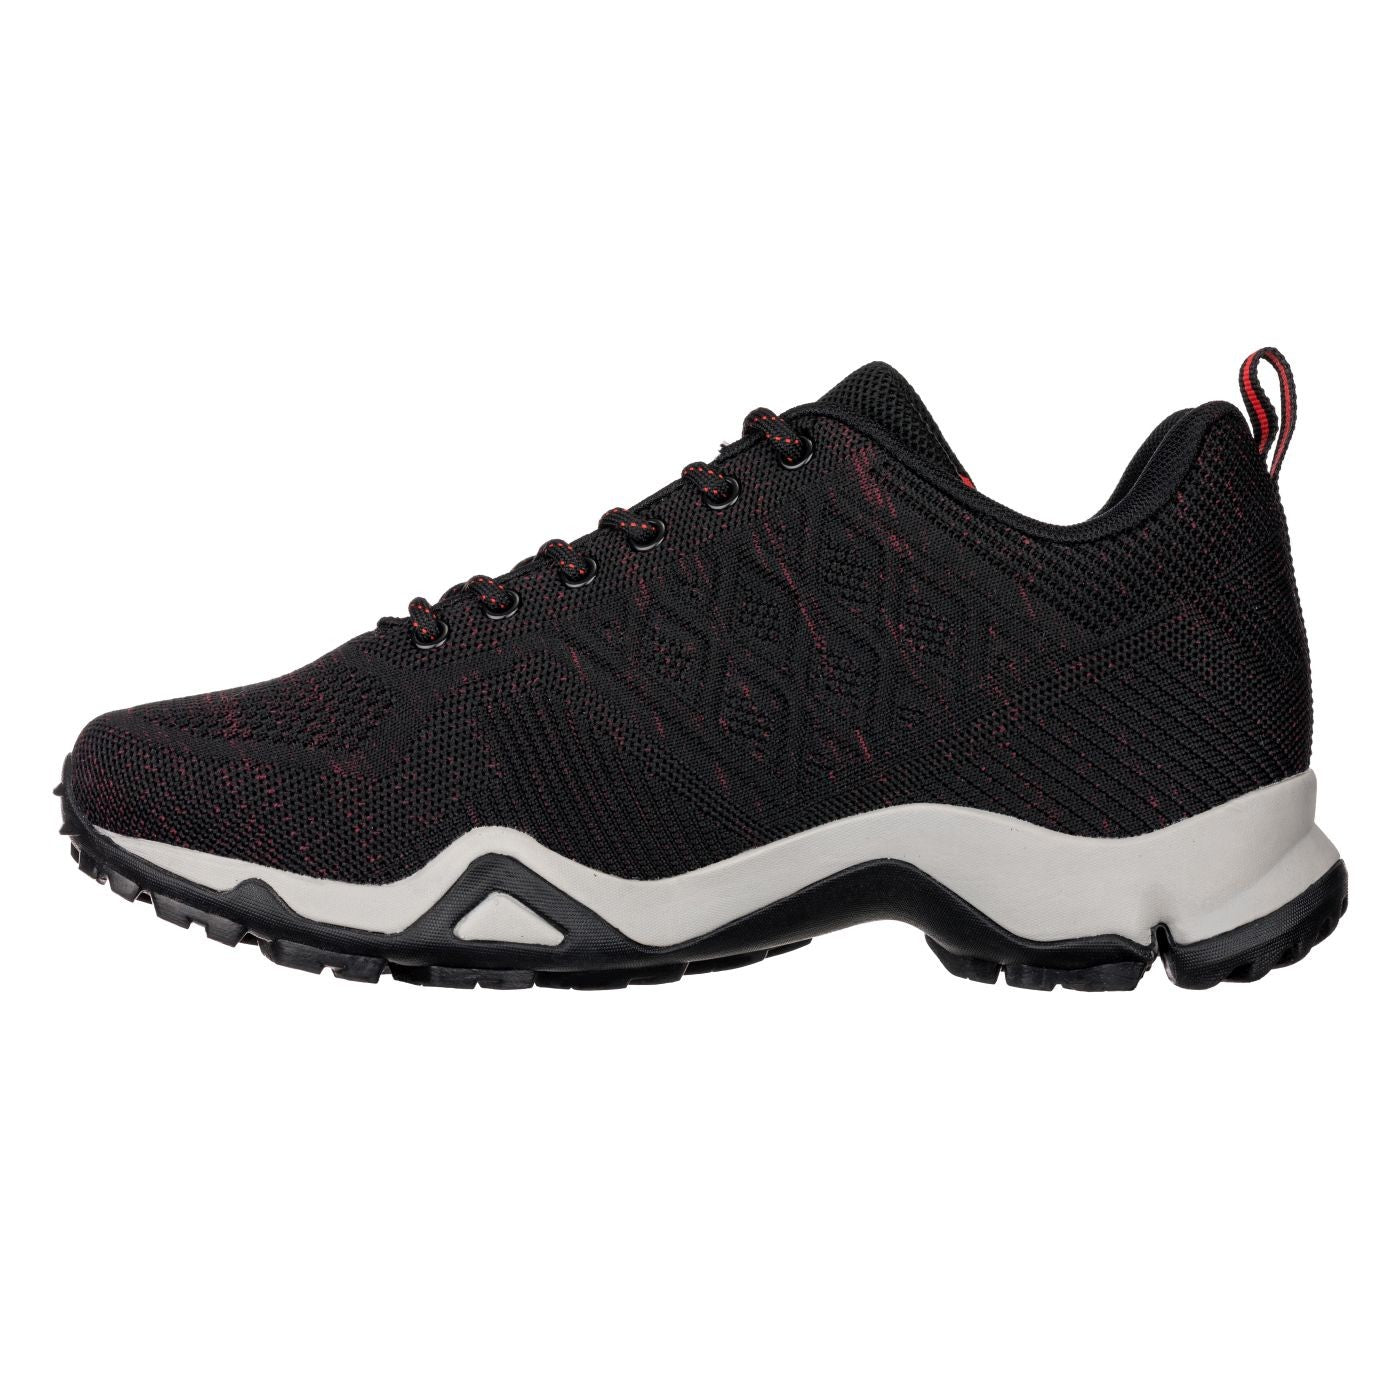 Elevator shoes height increase CALTO - Q103 - 2.4 Inches Taller (Black/Red) - Super Lightweight